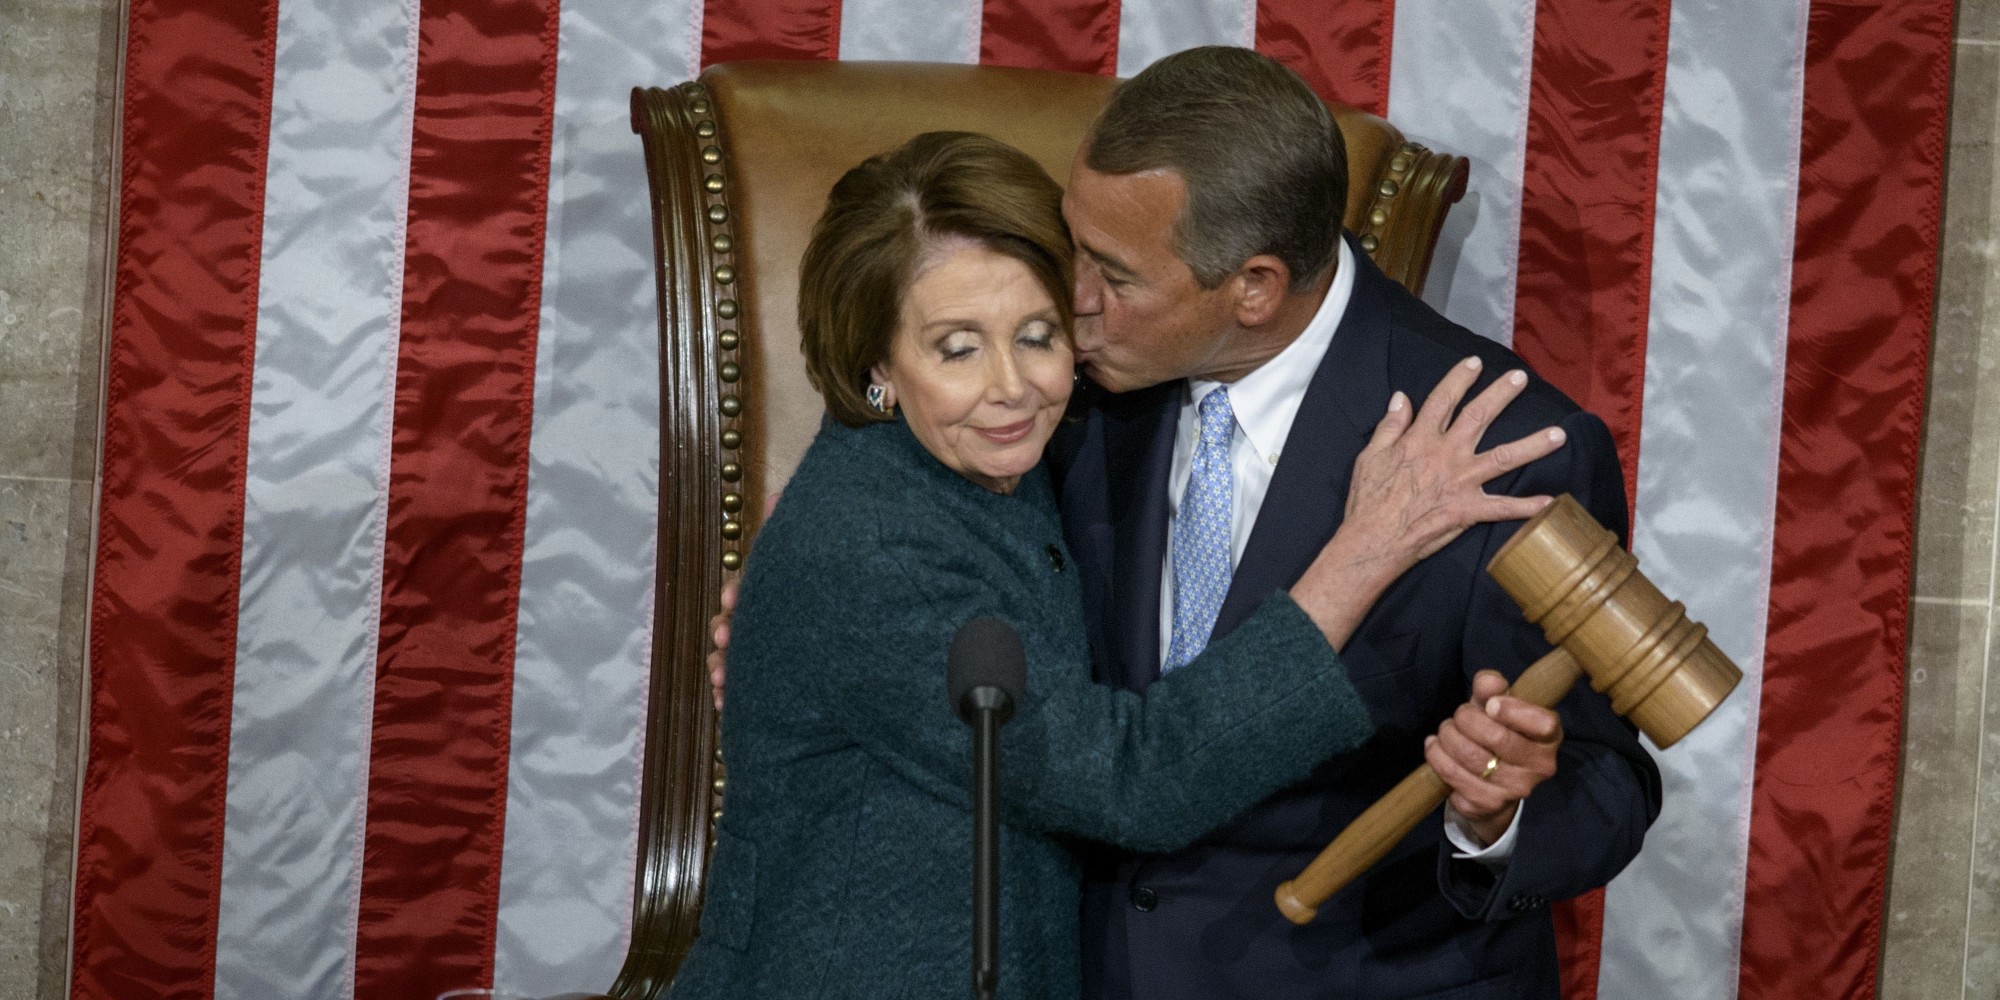 The Best Pictures From The First Day Of The 114th Congress | HuffPost